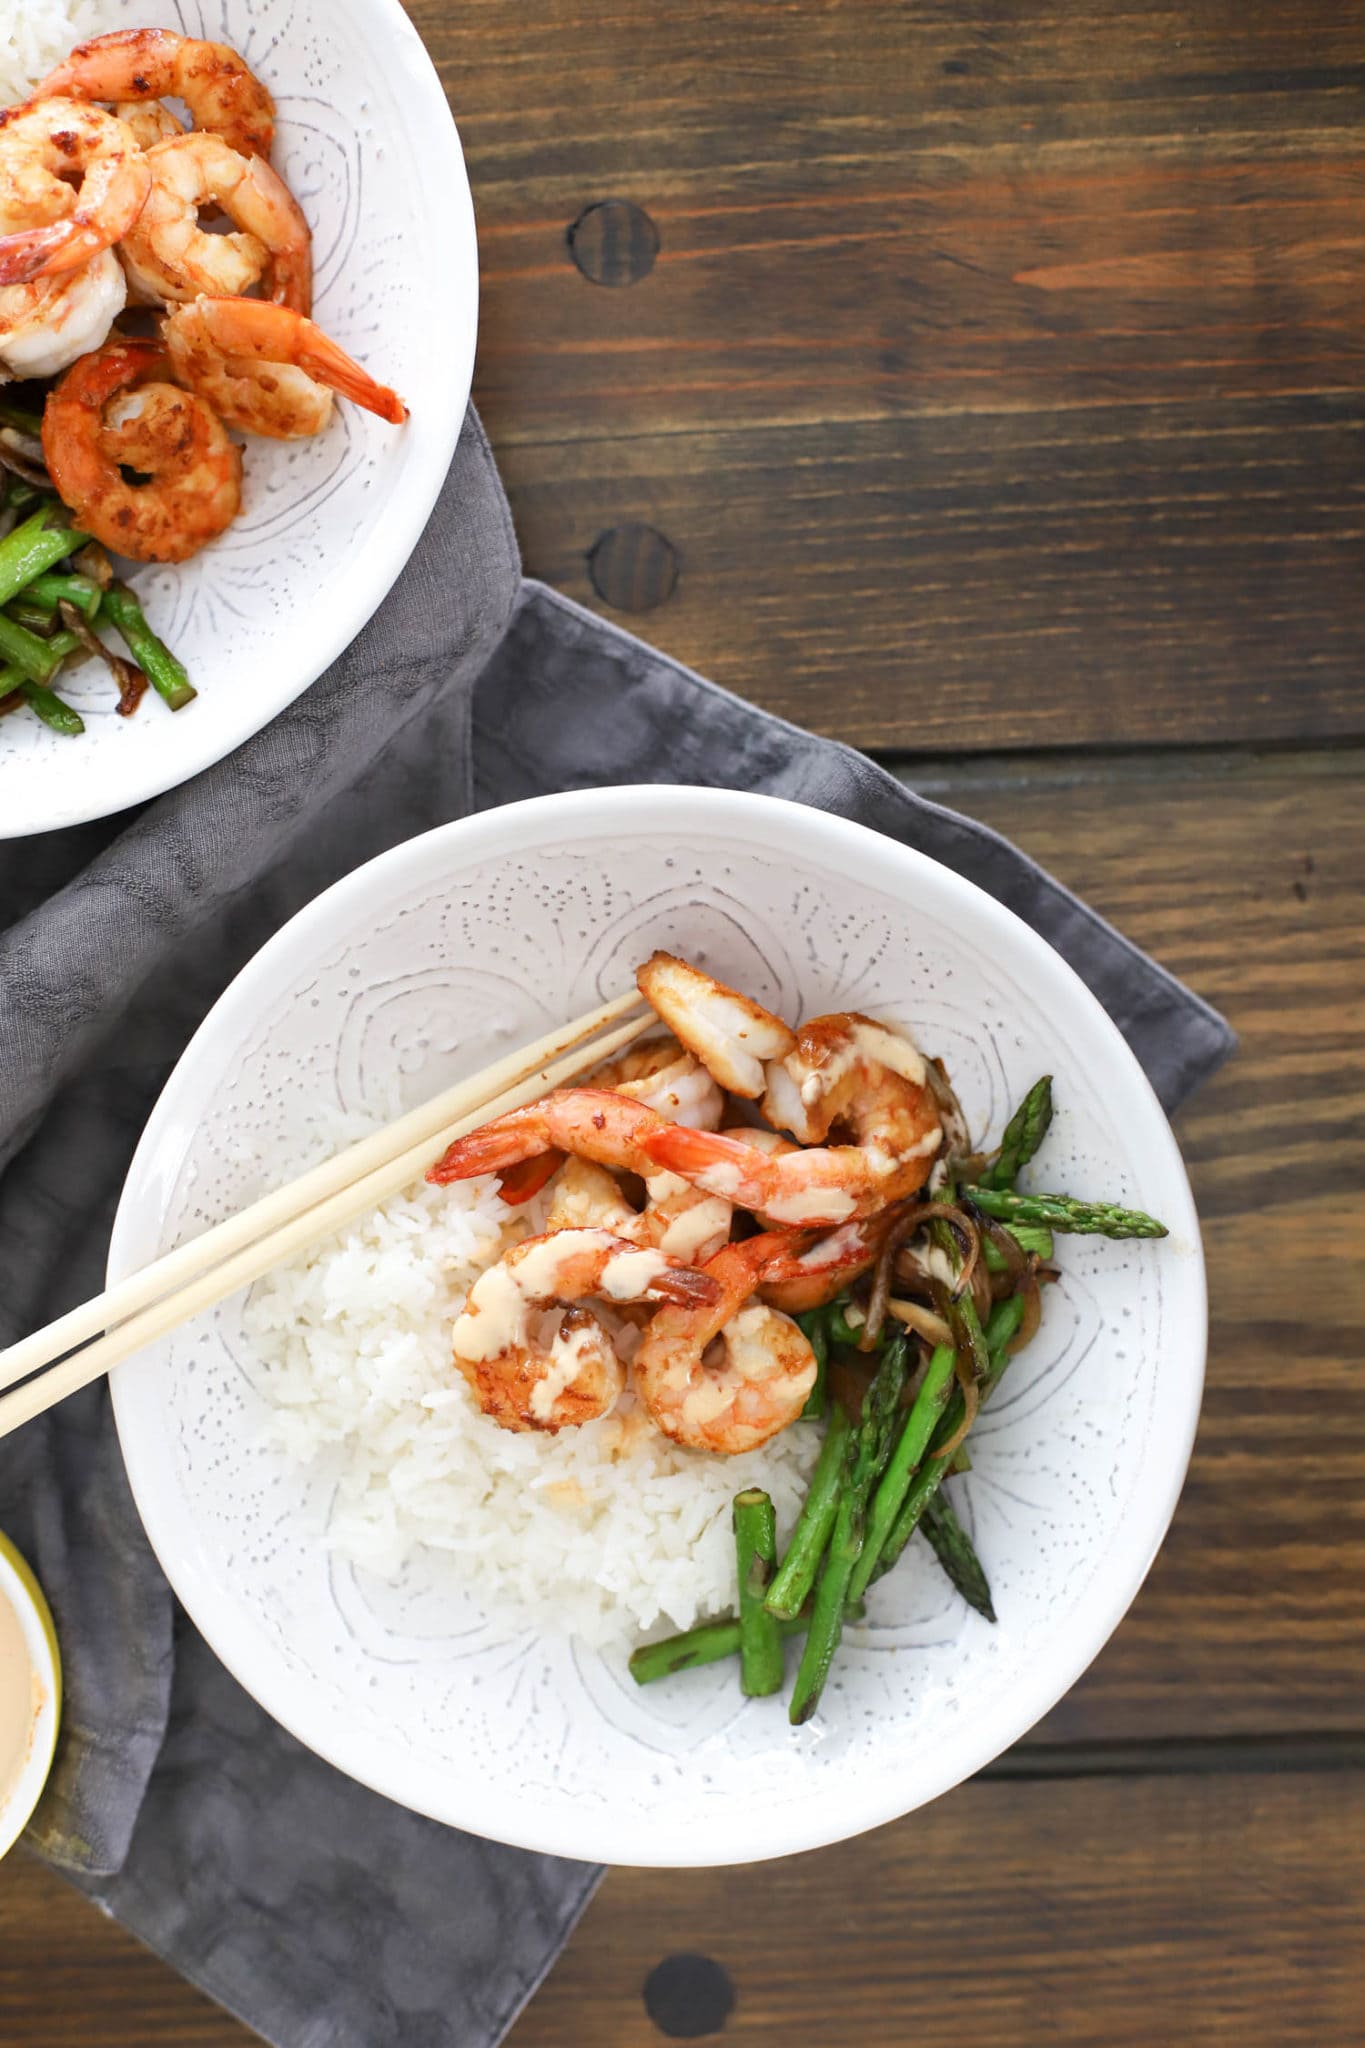 Easiest Protein EVER - Hibachi Shrimp Recipe with Video!